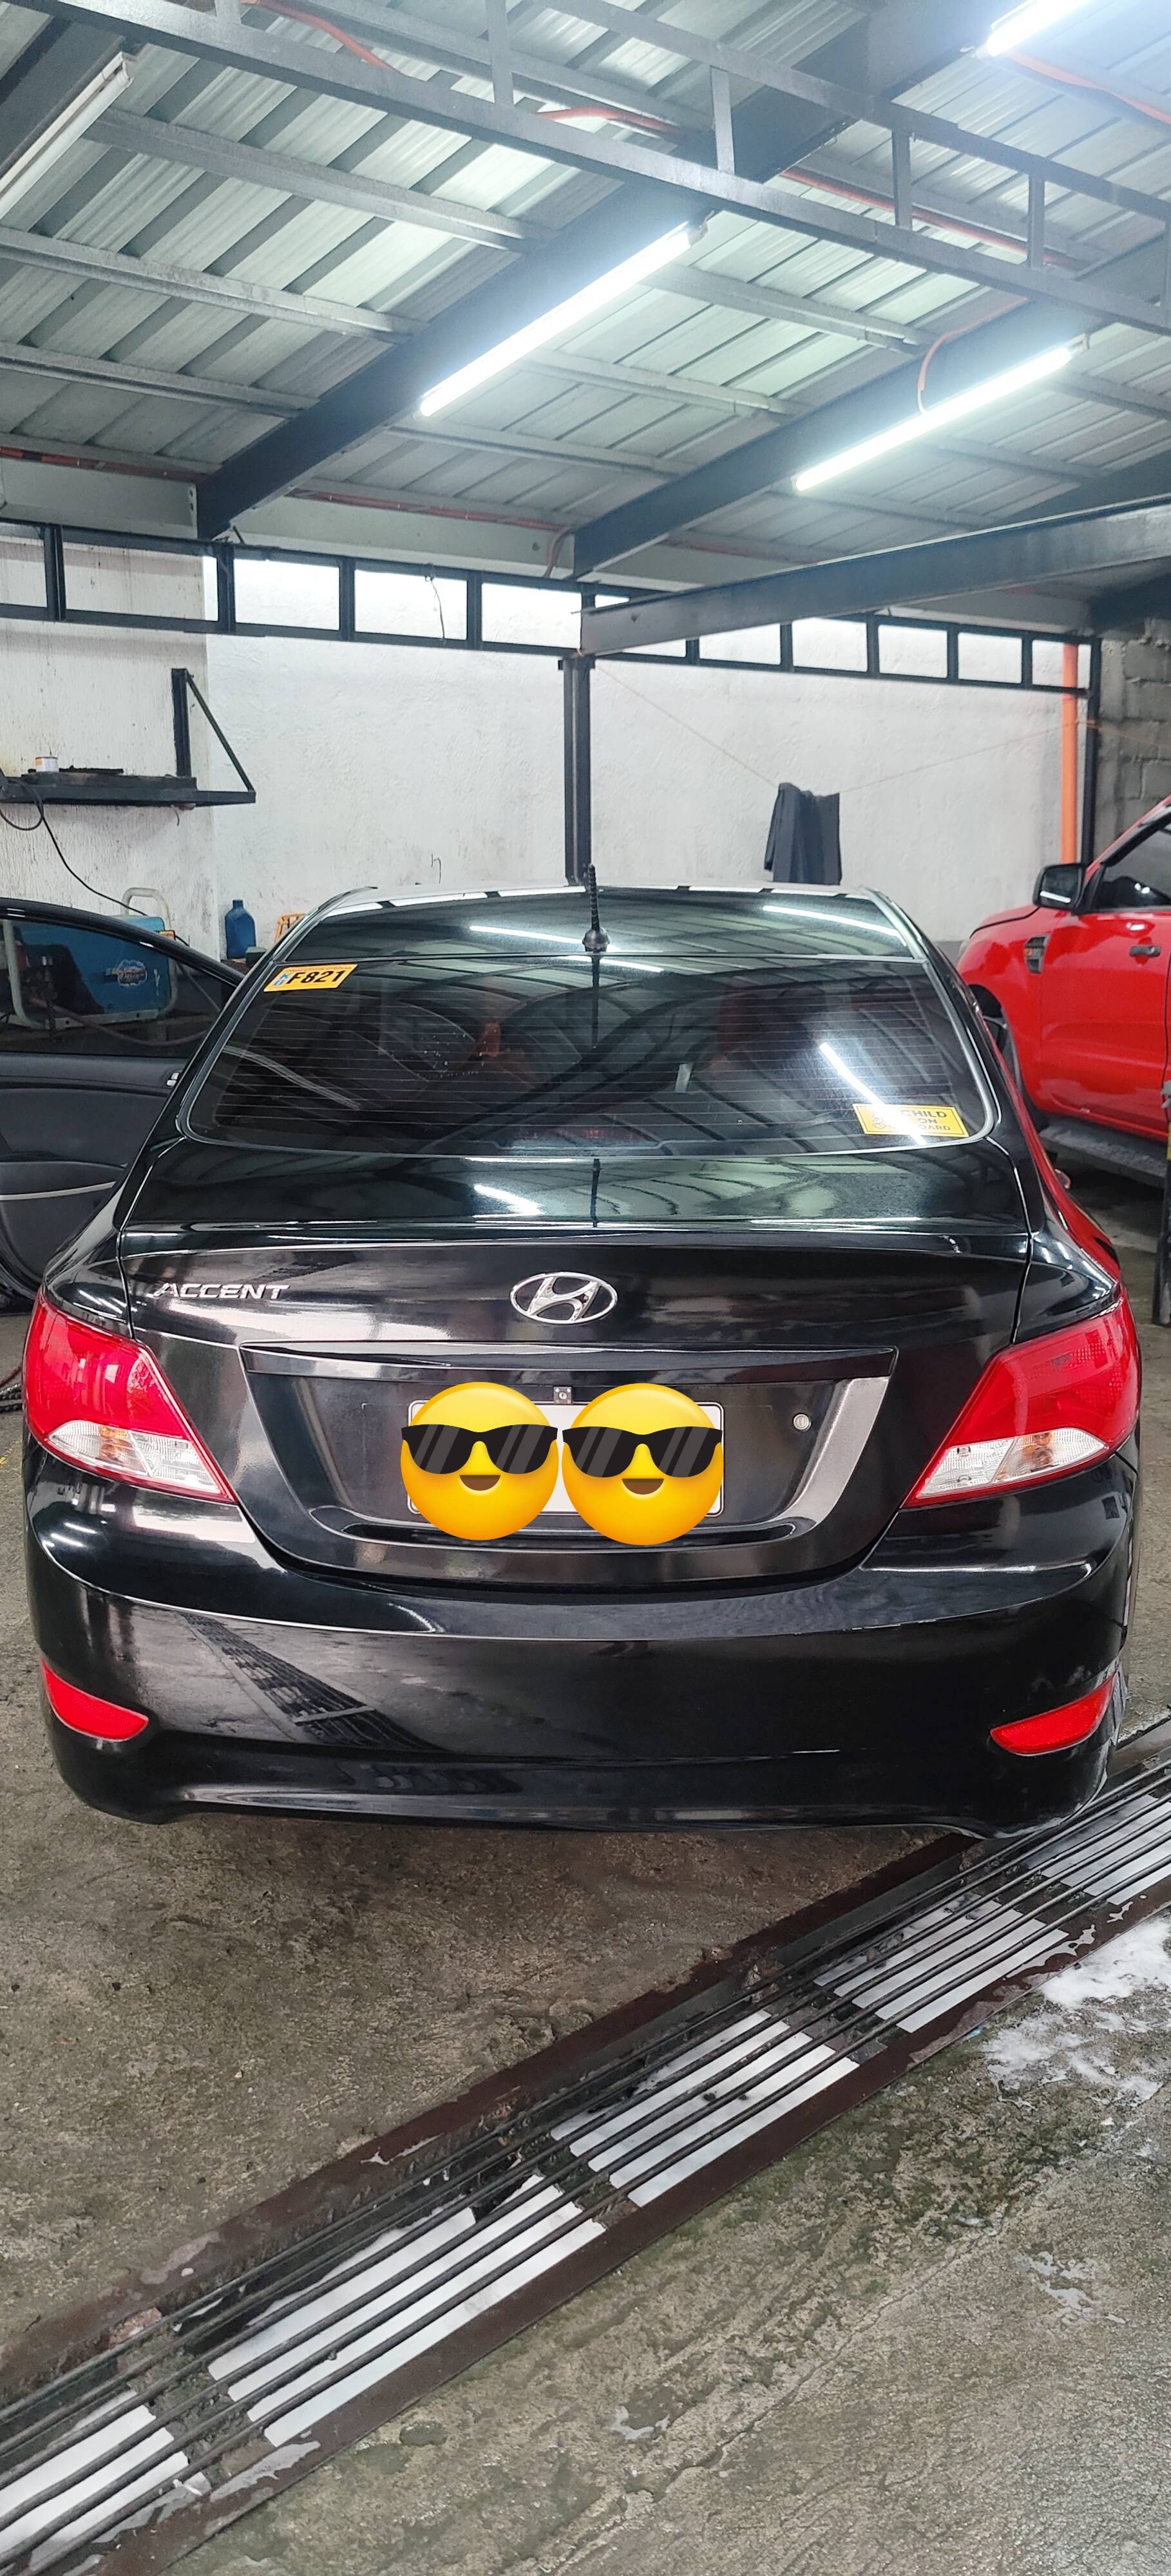 Second hand 2019 Hyundai Accent 1.4 GL 6MT w/o Airbags